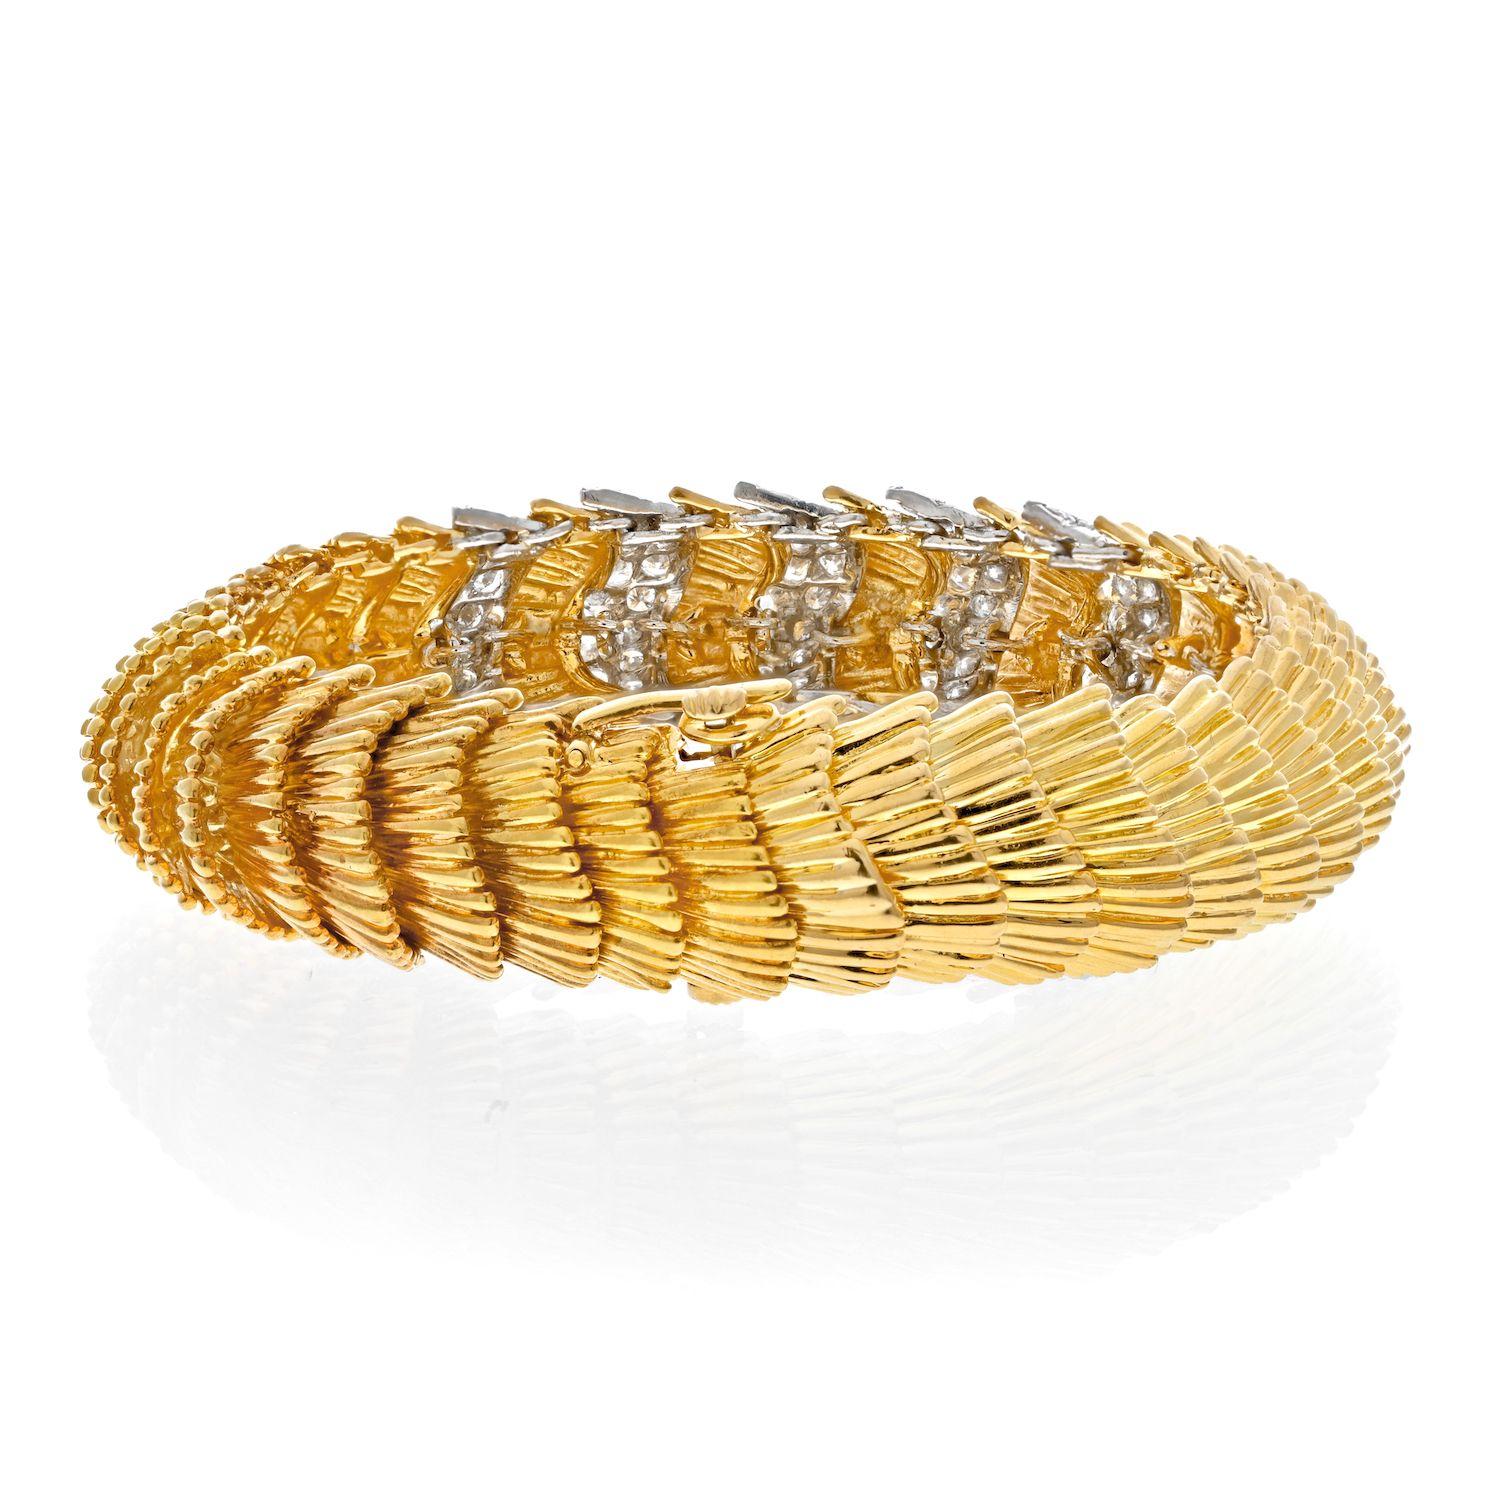 A vintage bracelet by David Webb crafted in 18 karat gold comprised of flexible rows of intricate featherlike links. The ridged links a smooth to the touch, with five links containing round brilliant cut diamonds weighing approximately 5.75 carats